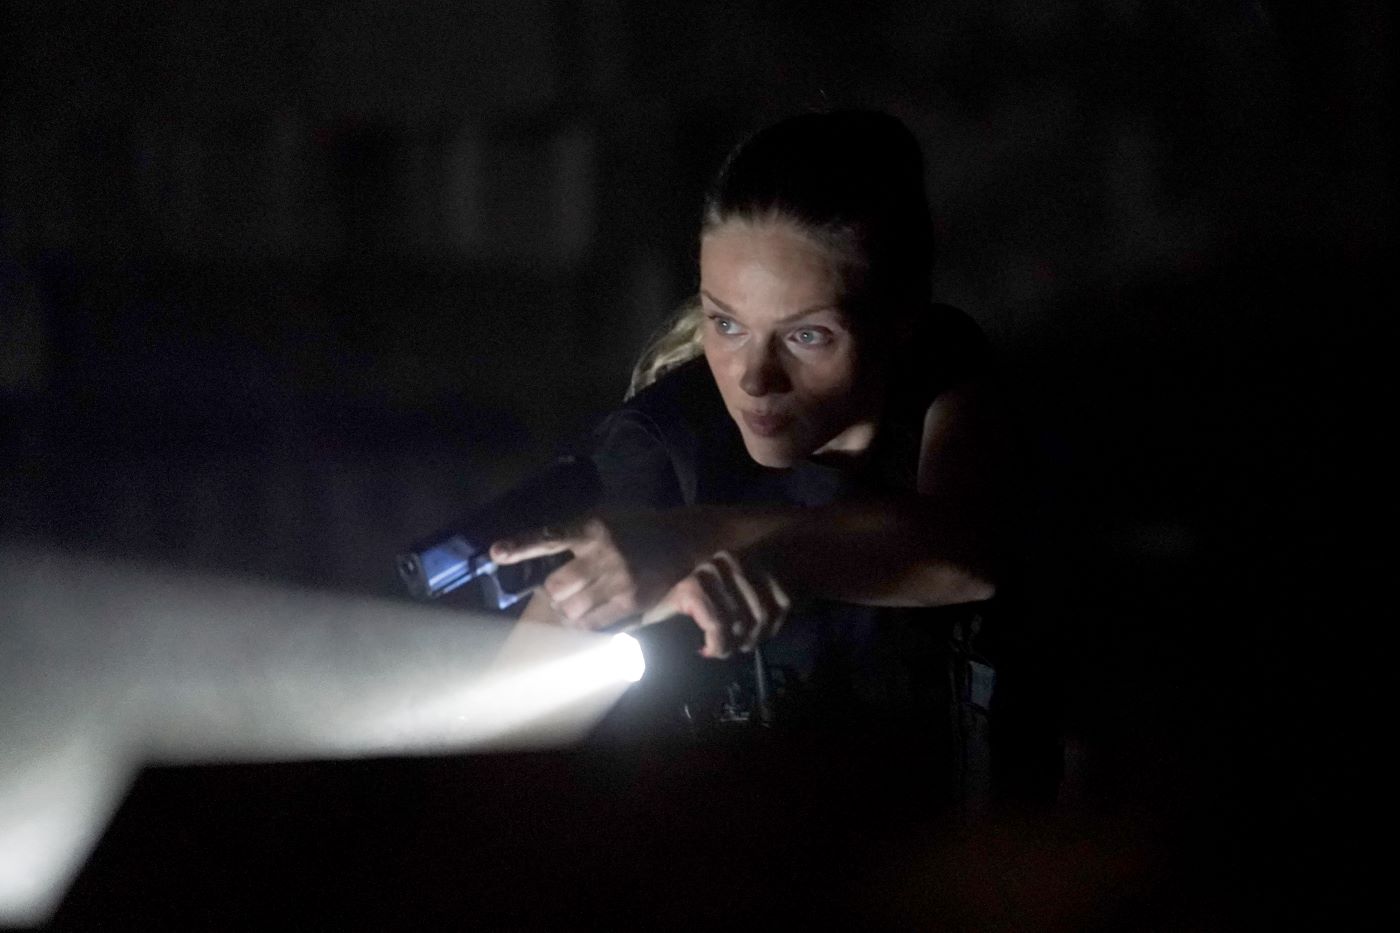 Tracy Spiridakos as Hailey from 'Chicago P.D.' in a dark room with a flashlight dressed as her character